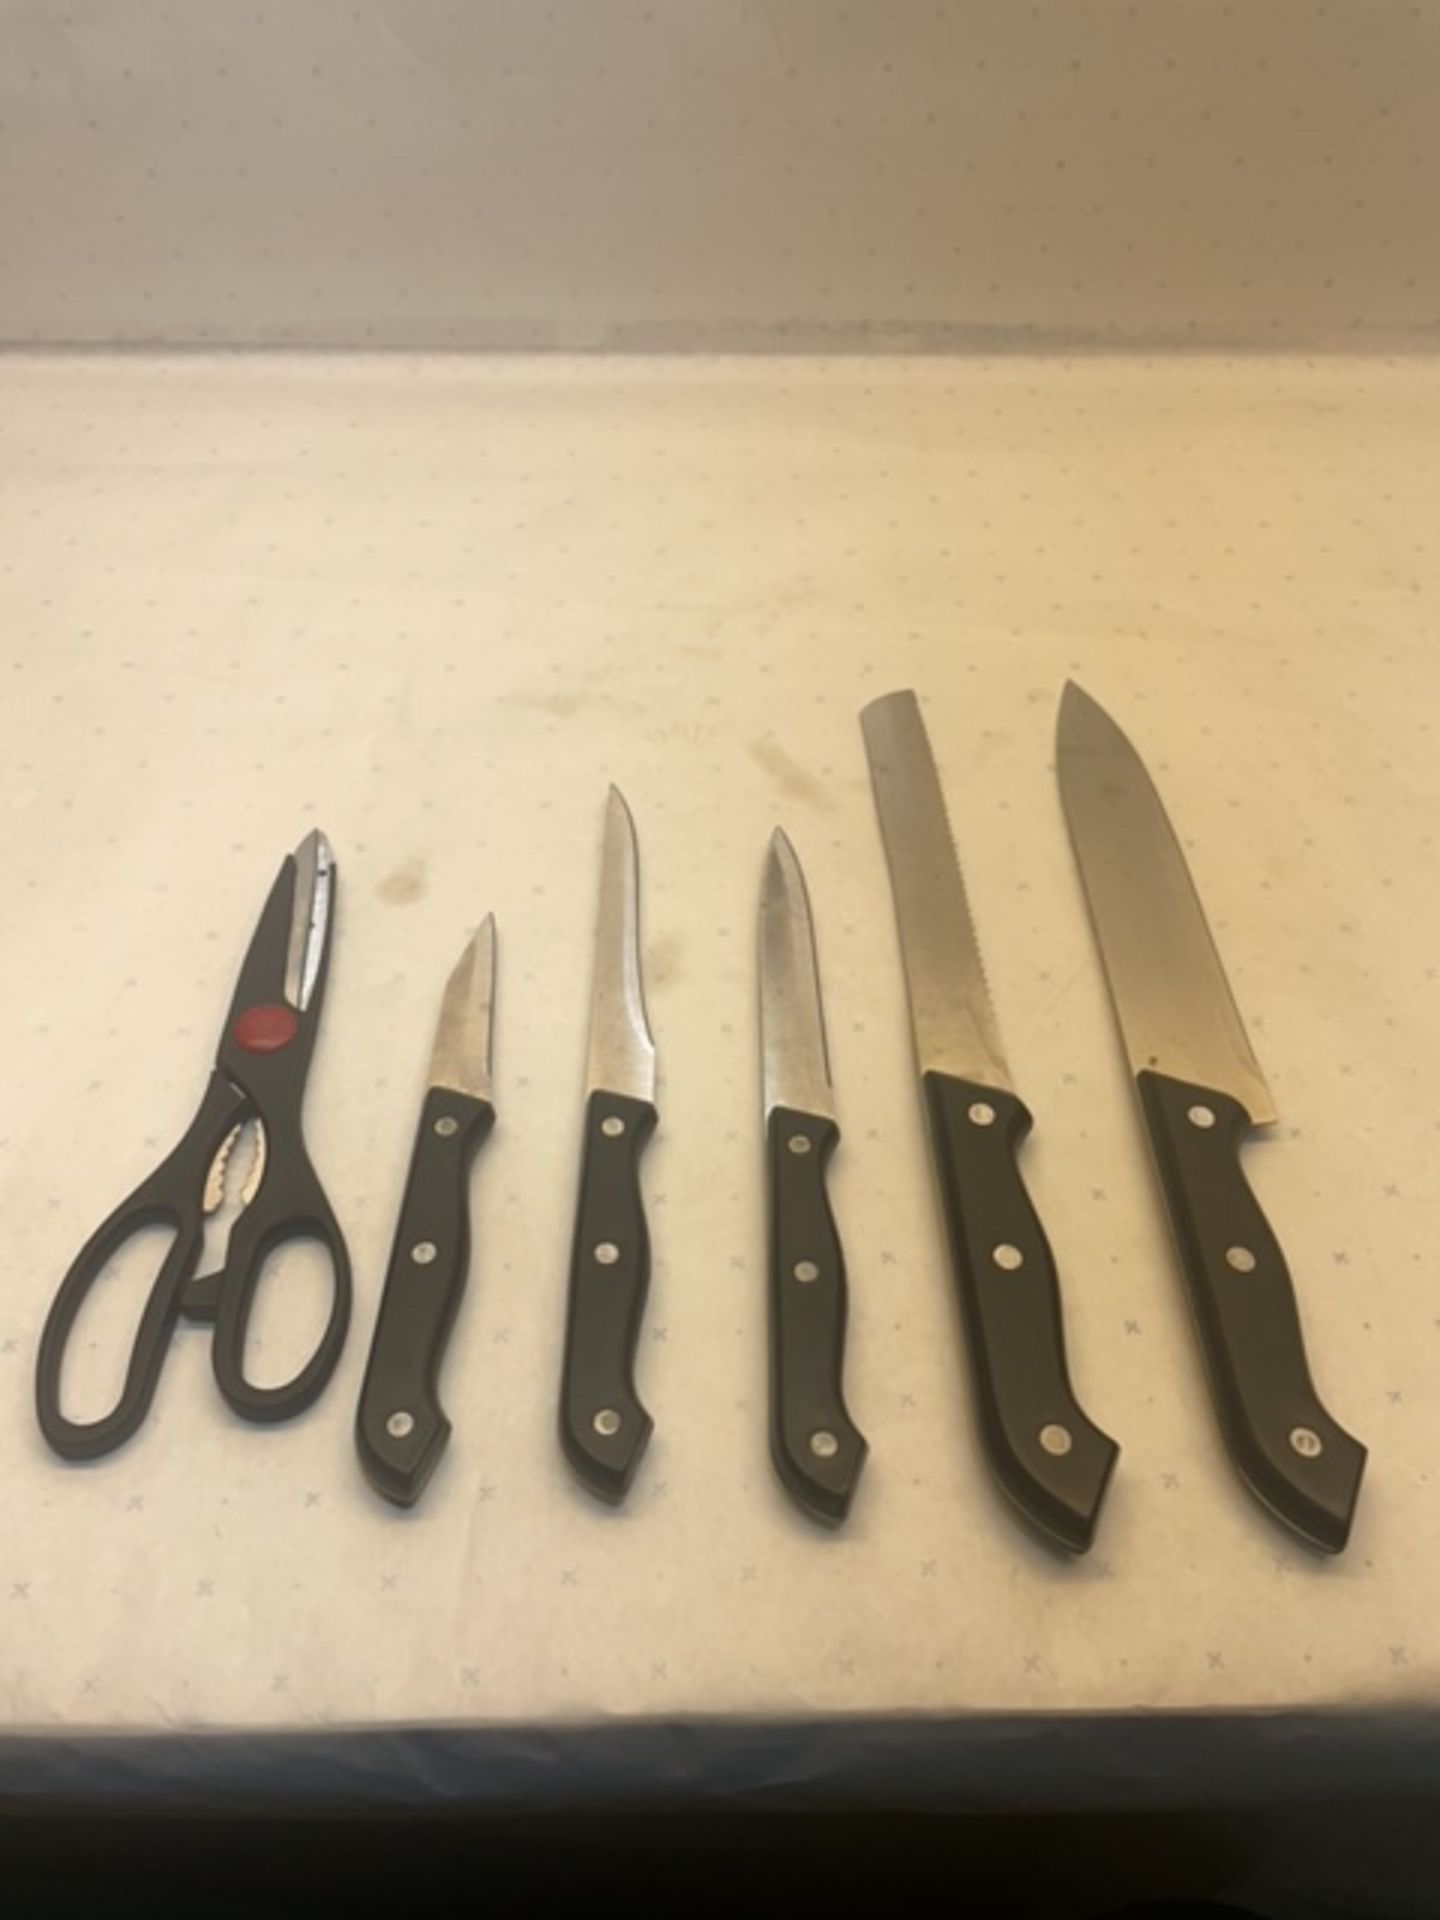 5 X Knife set in Wooden Block with Scissors - Image 3 of 3